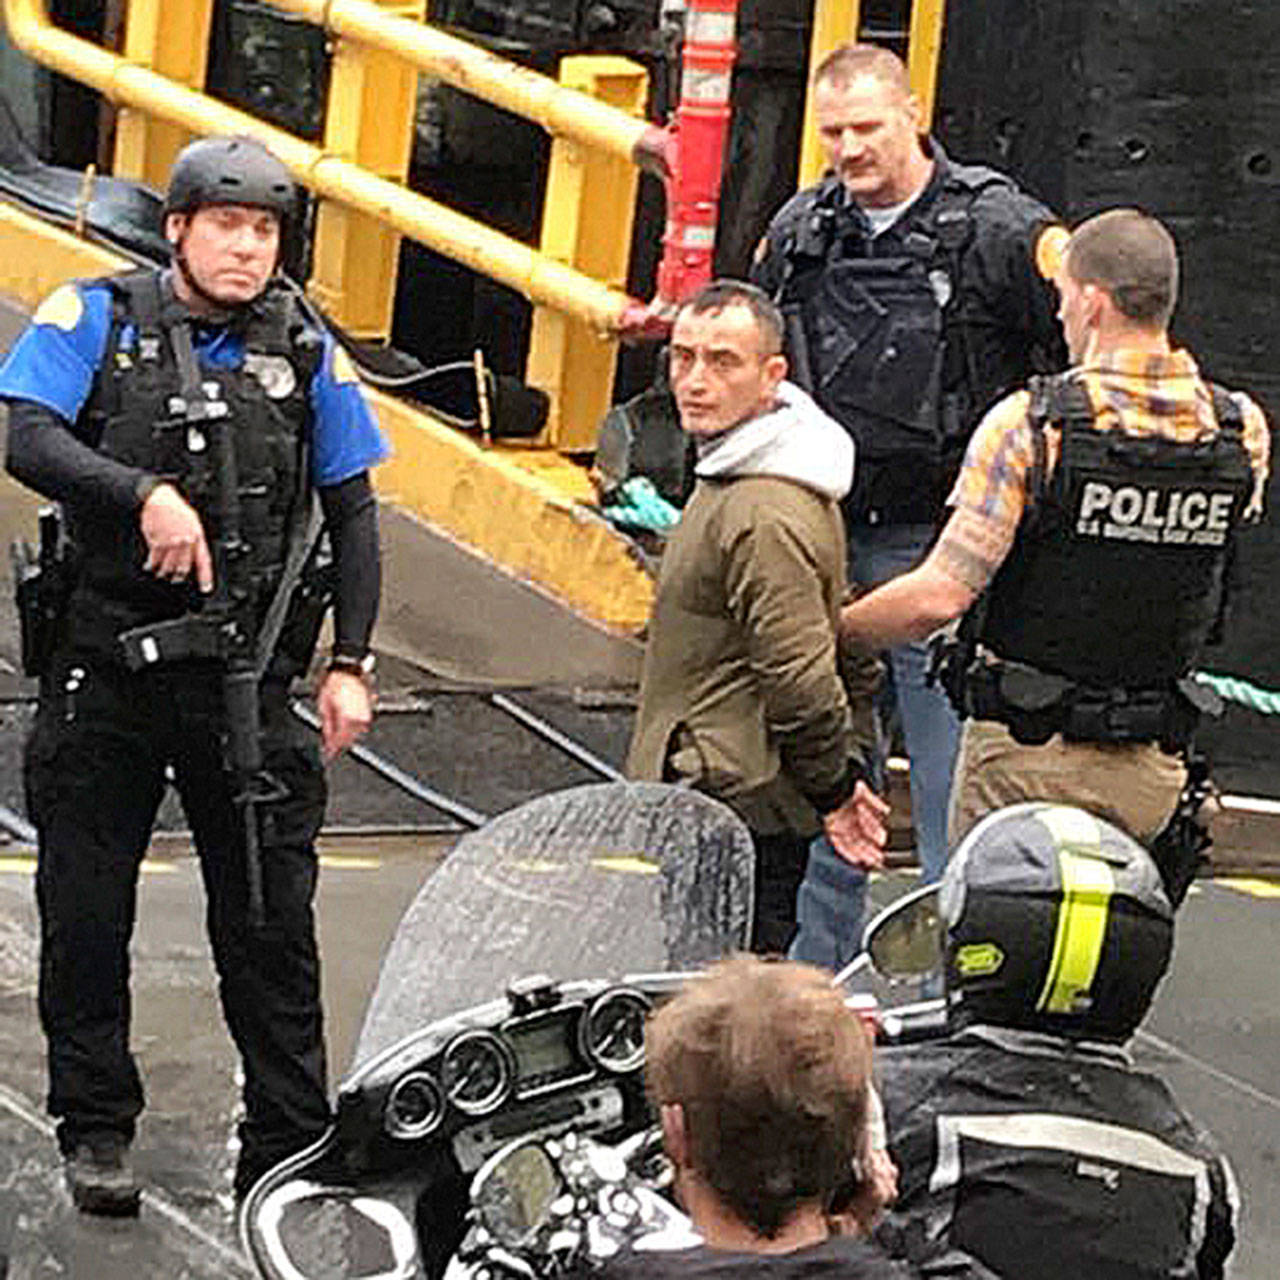 Contributed photo — A man was arrested on the 7:30 a.m. ferry to Mukilteo on Wednesday morning after he brandished a knife in a confrontation with a juvenile.